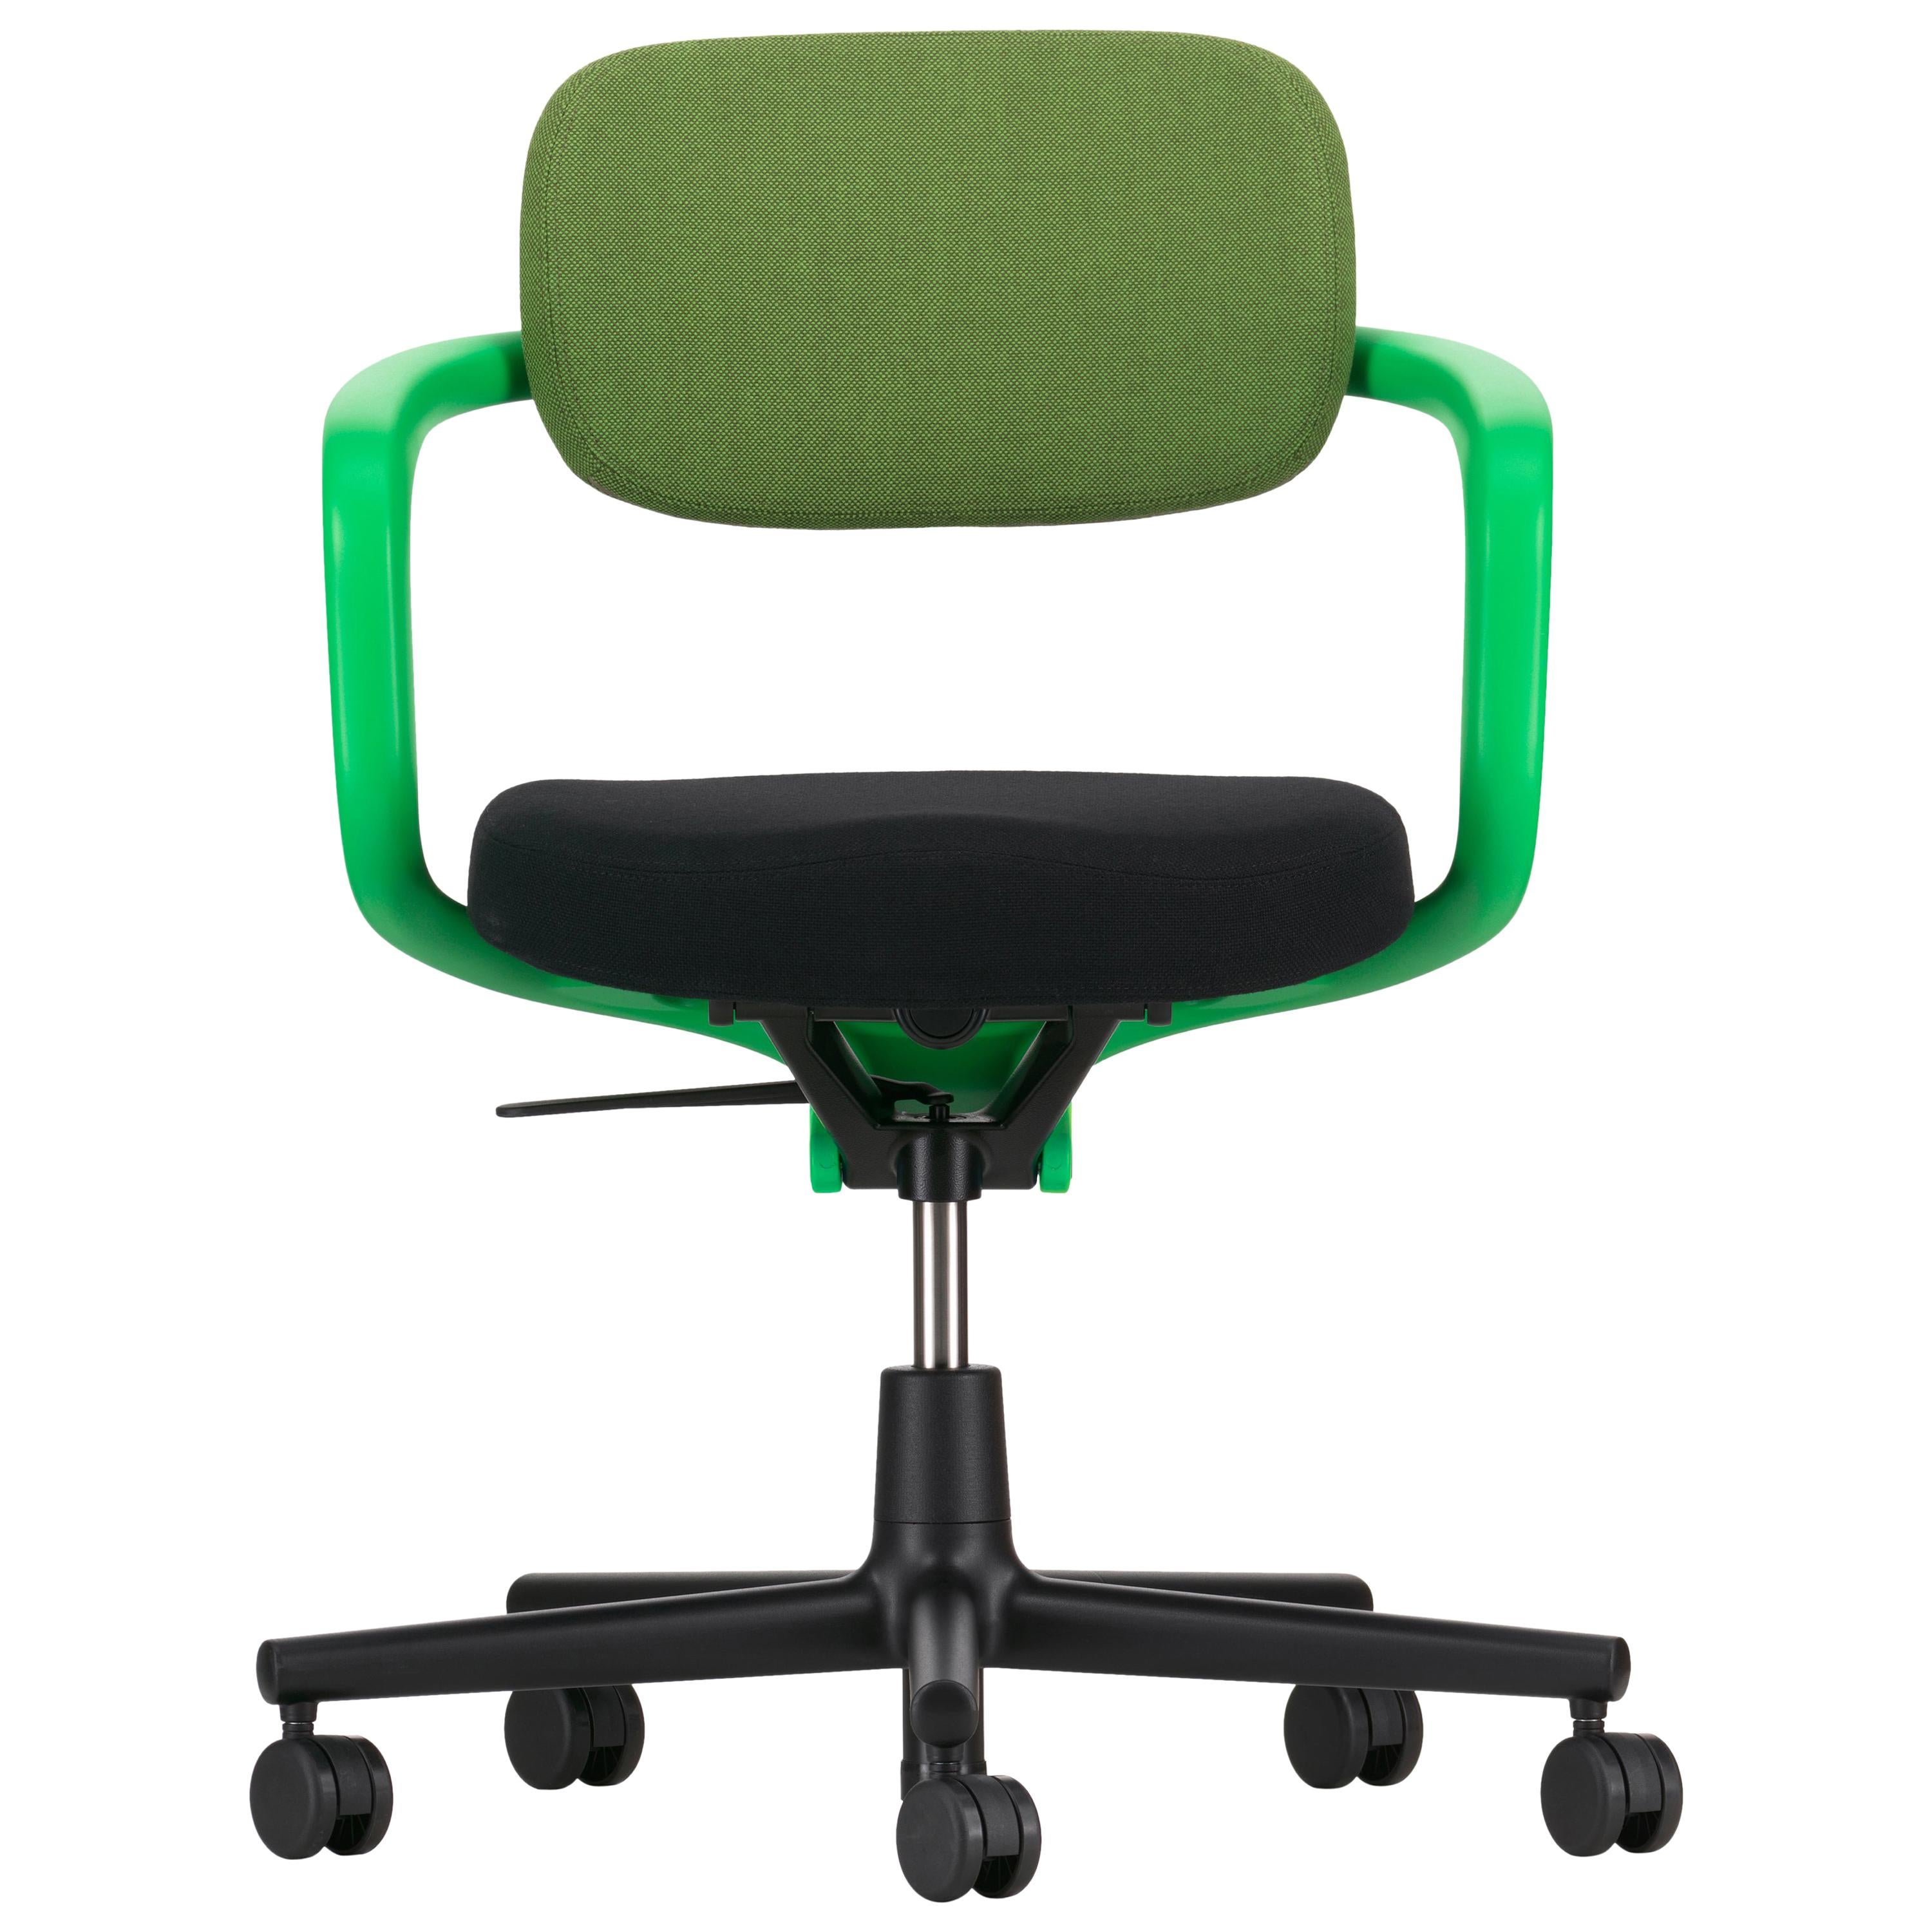 Vitra Allstar Chair in Grass & Green Forest and Nero Hopsak by Konstantin Grcic For Sale